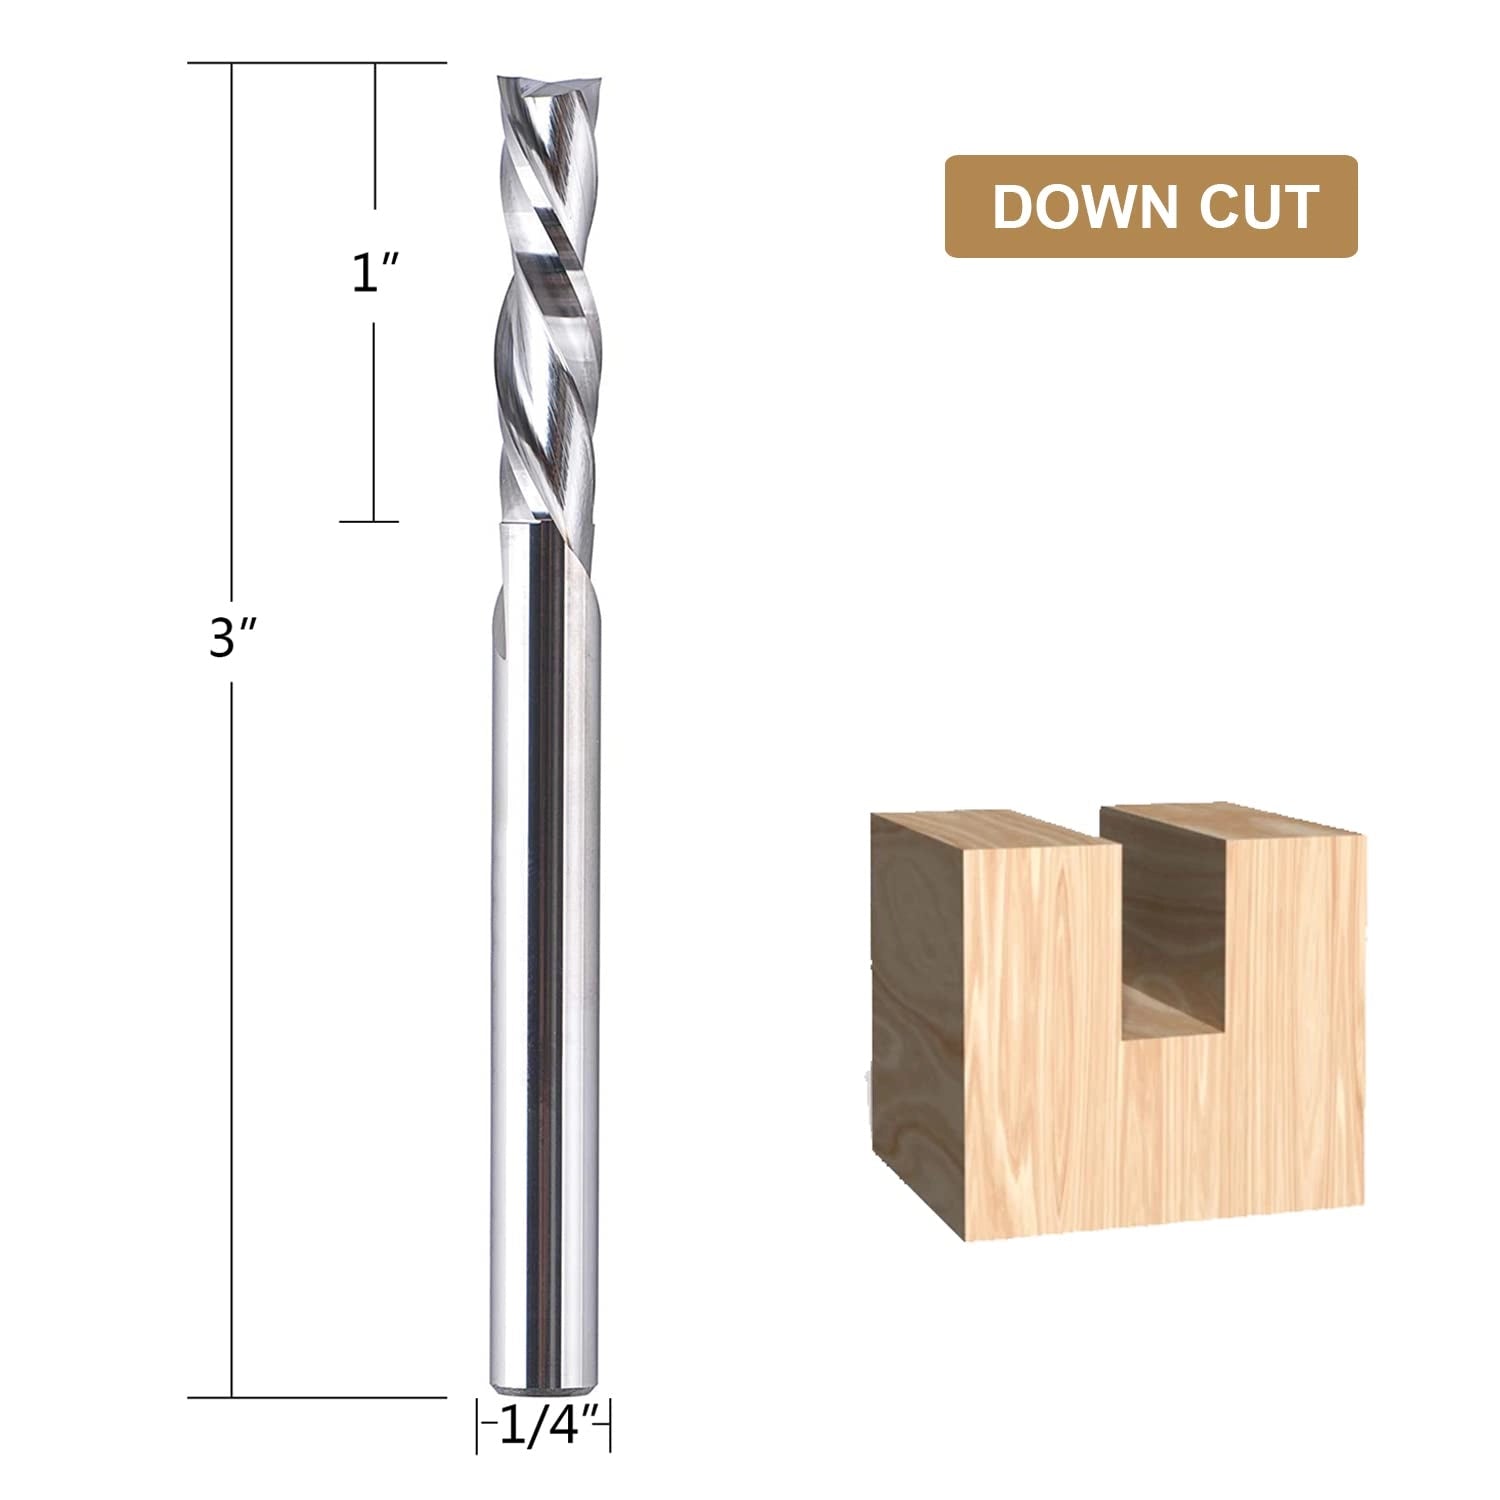 SpeTool Downcut Spiral Router Bit 1/4" Diam 3" Extra Long Wood Cut Carving